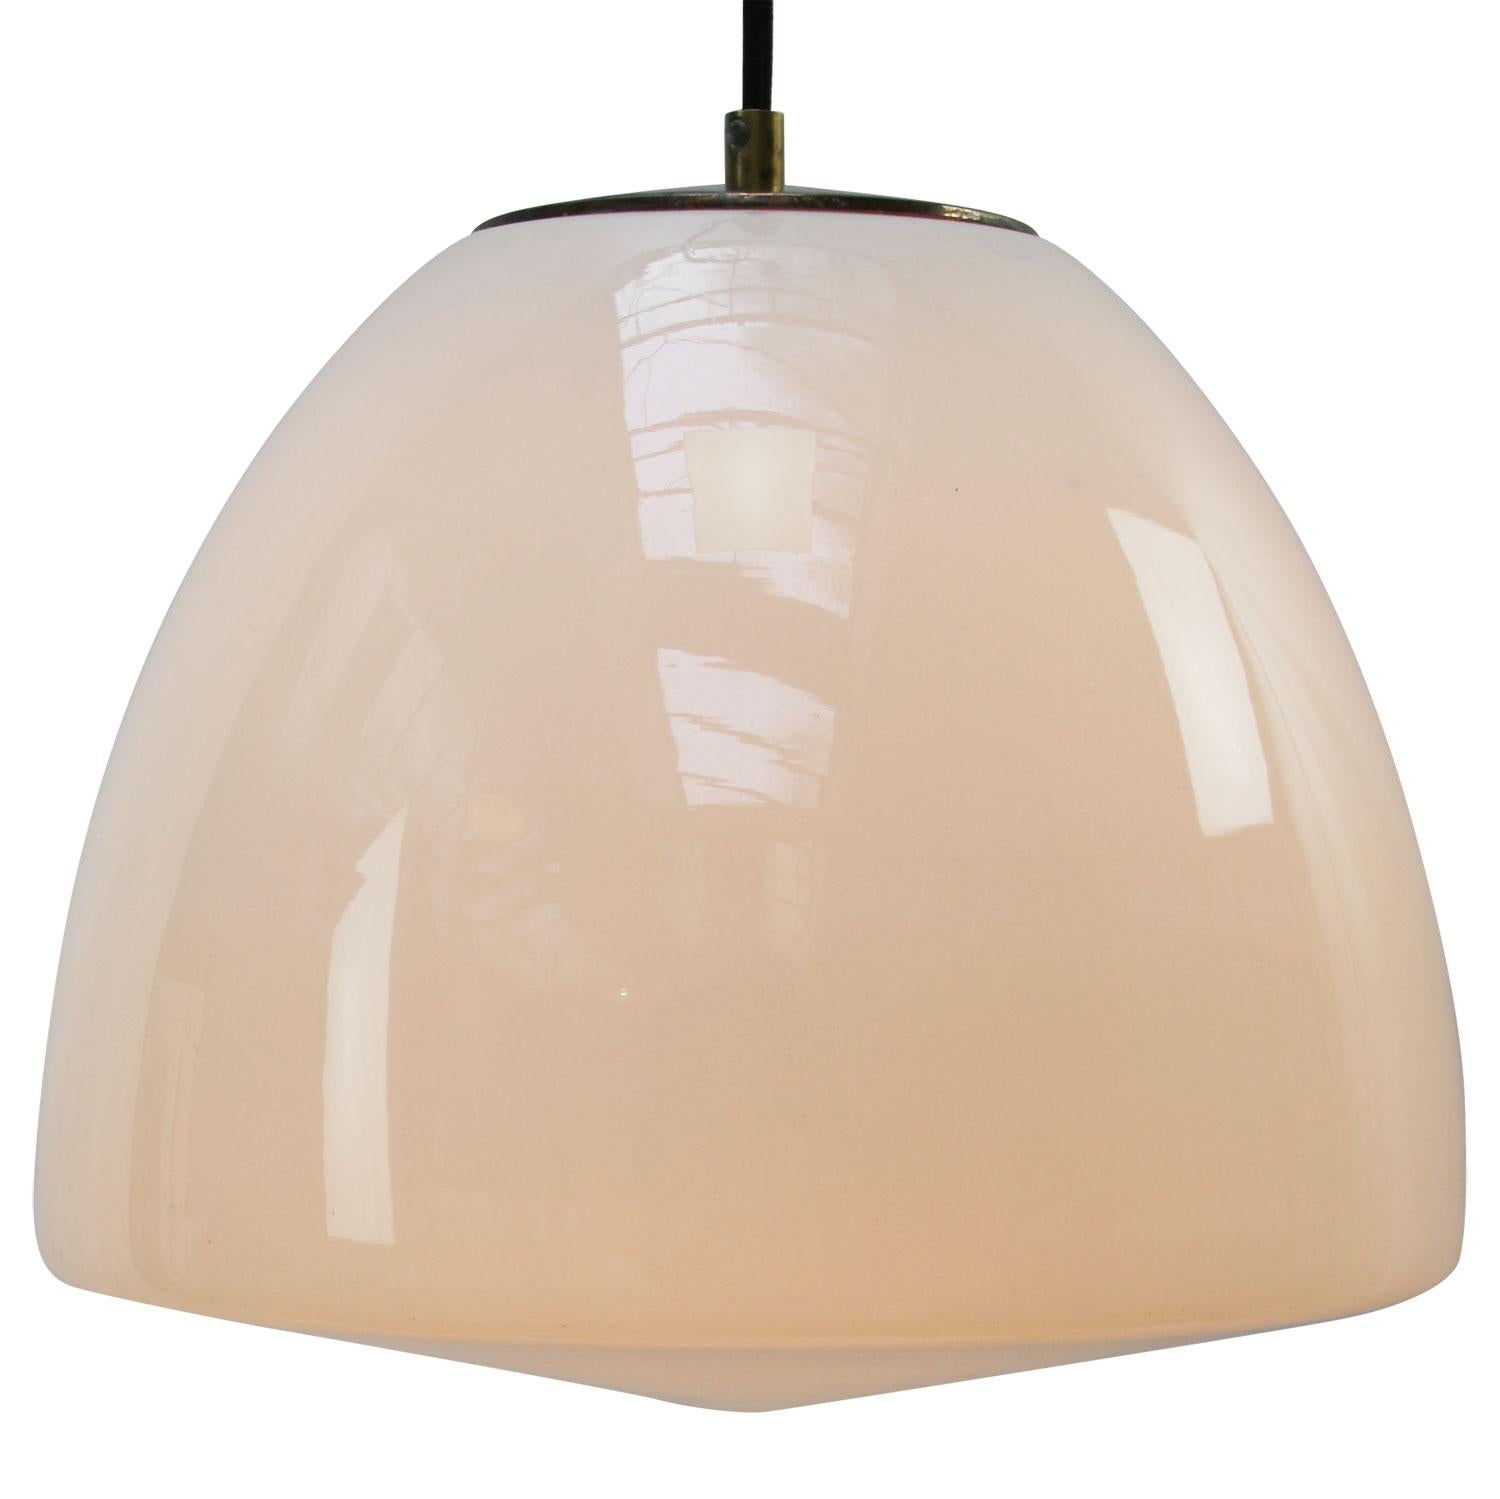 Opaline glass pendant.
2 meter black wire

Weight: 2.00 kg / 4.4 lb

Priced per individual item. All lamps have been made suitable by international standards for incandescent light bulbs, energy-efficient and LED bulbs. E26/E27 bulb holders and